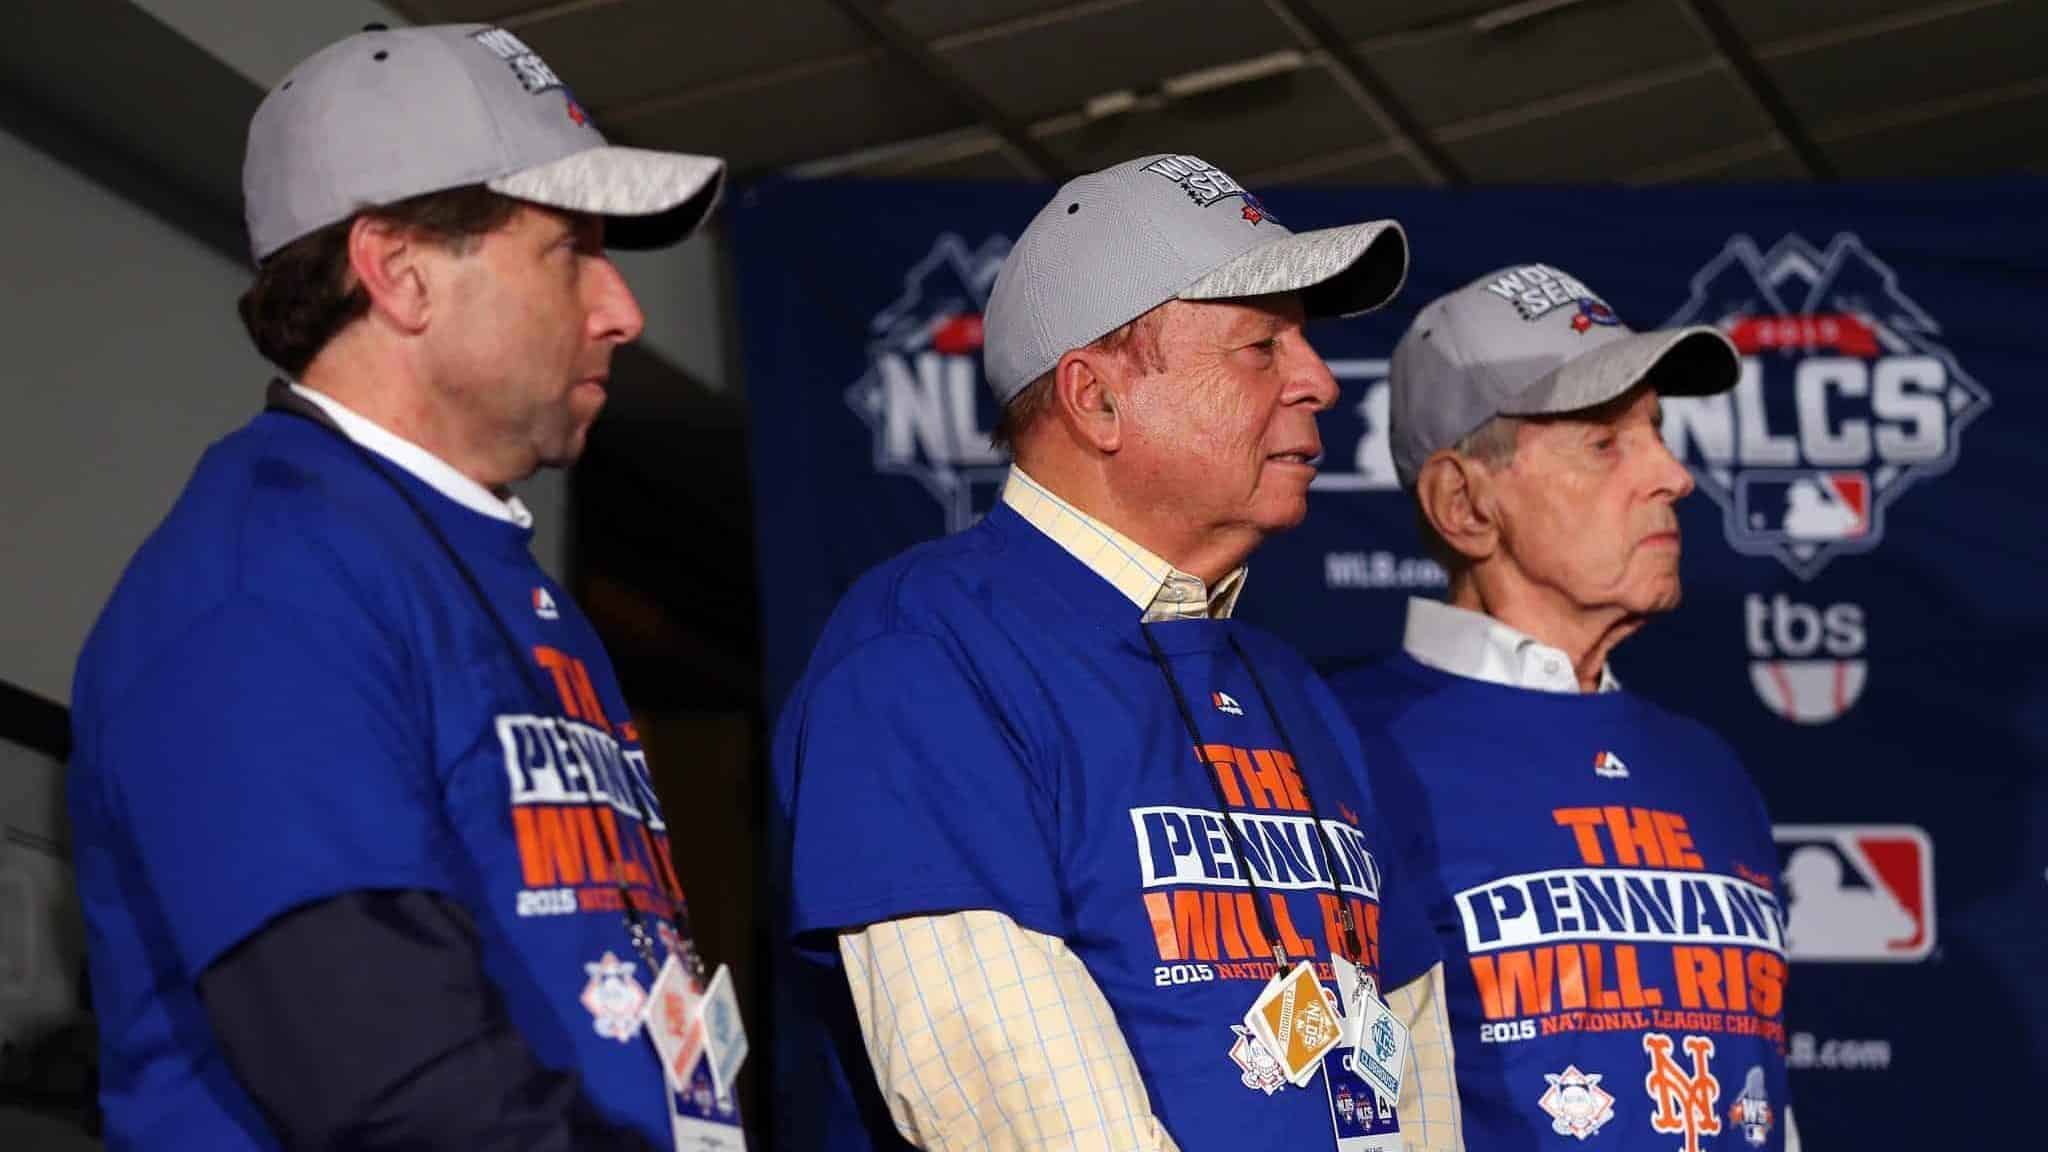 CHICAGO, IL - OCTOBER 21: (L-R) Chief Operating Officer Jeff Wilpon, Chief Executive Officer Saul Katz and Owner Fred Wilpon of the New York Mets look on after defeating the Chicago Cubs in game four of the 2015 MLB National League Championship Series at Wrigley Field on October 21, 2015 in Chicago, Illinois. The Mets defeated the Cubs with a score of 8 to 3 to sweep the Championship Series.